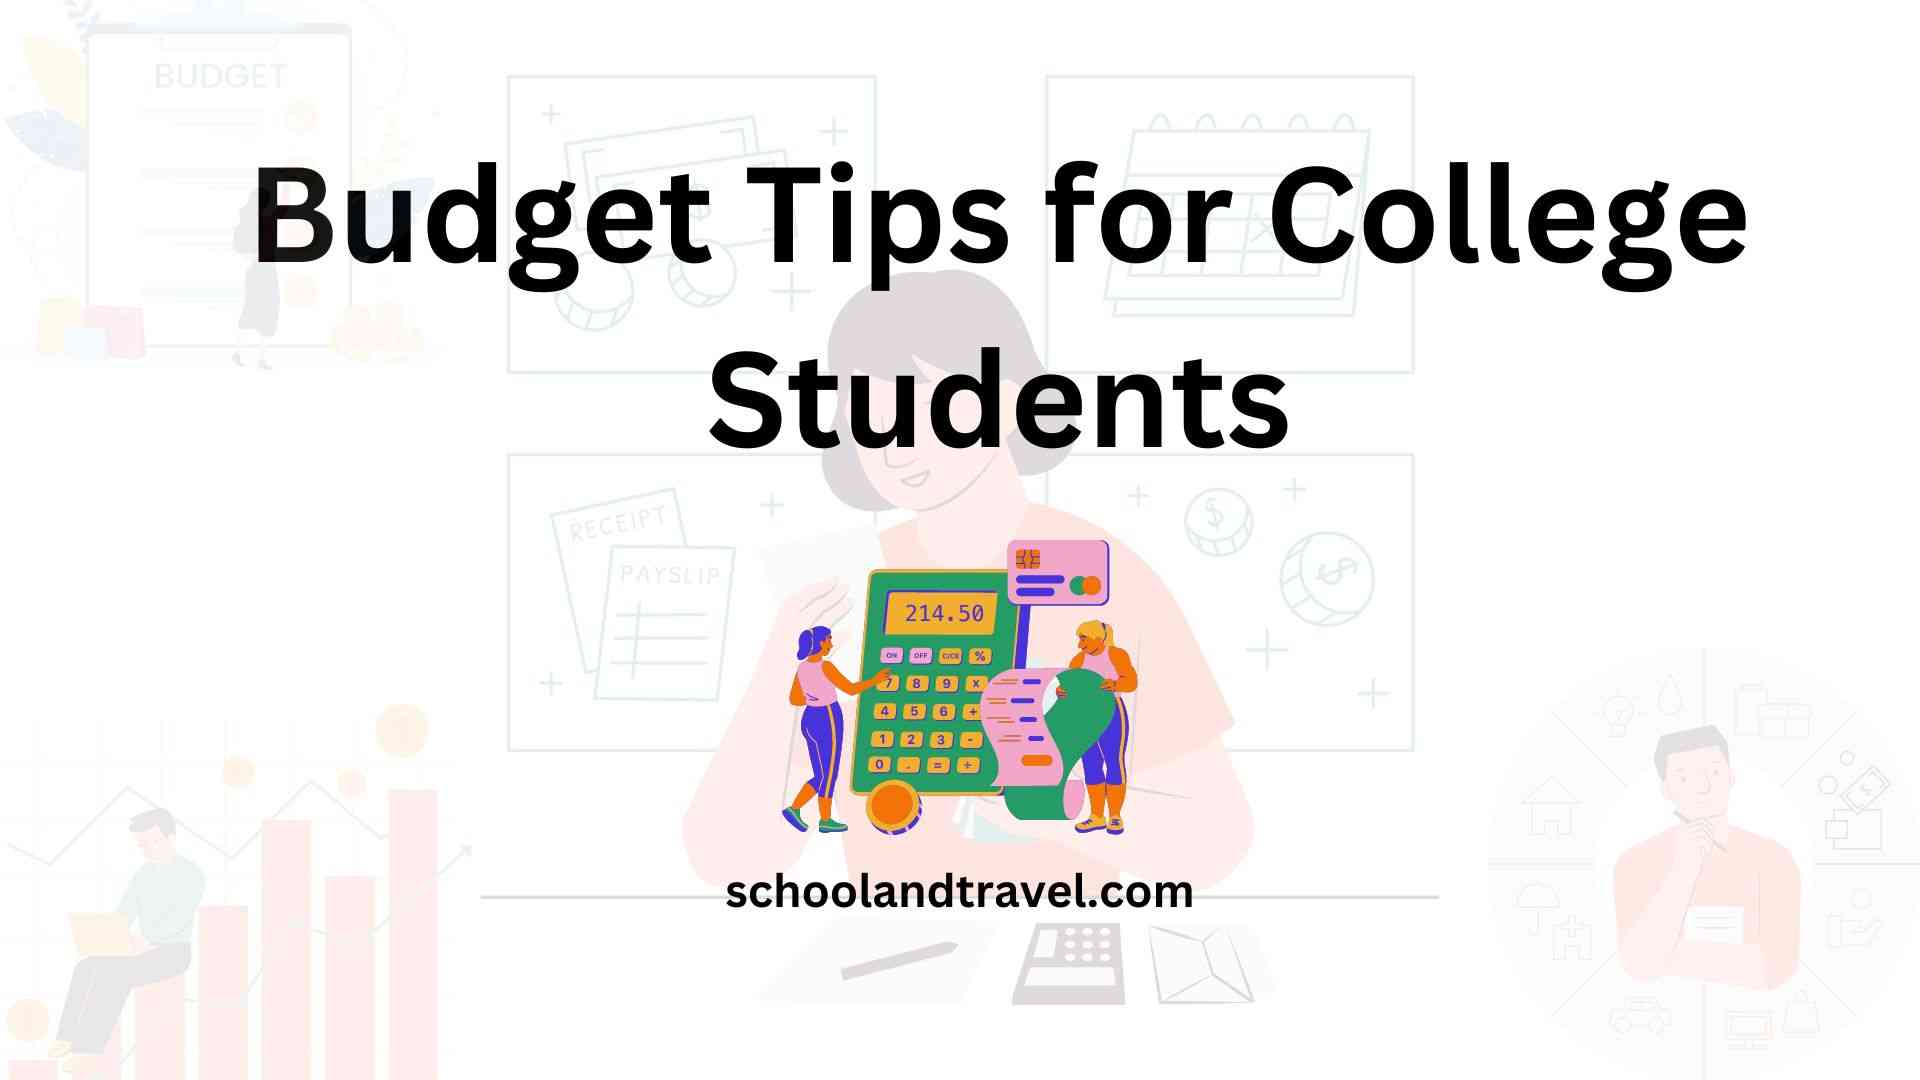 Budget Tips for College Students